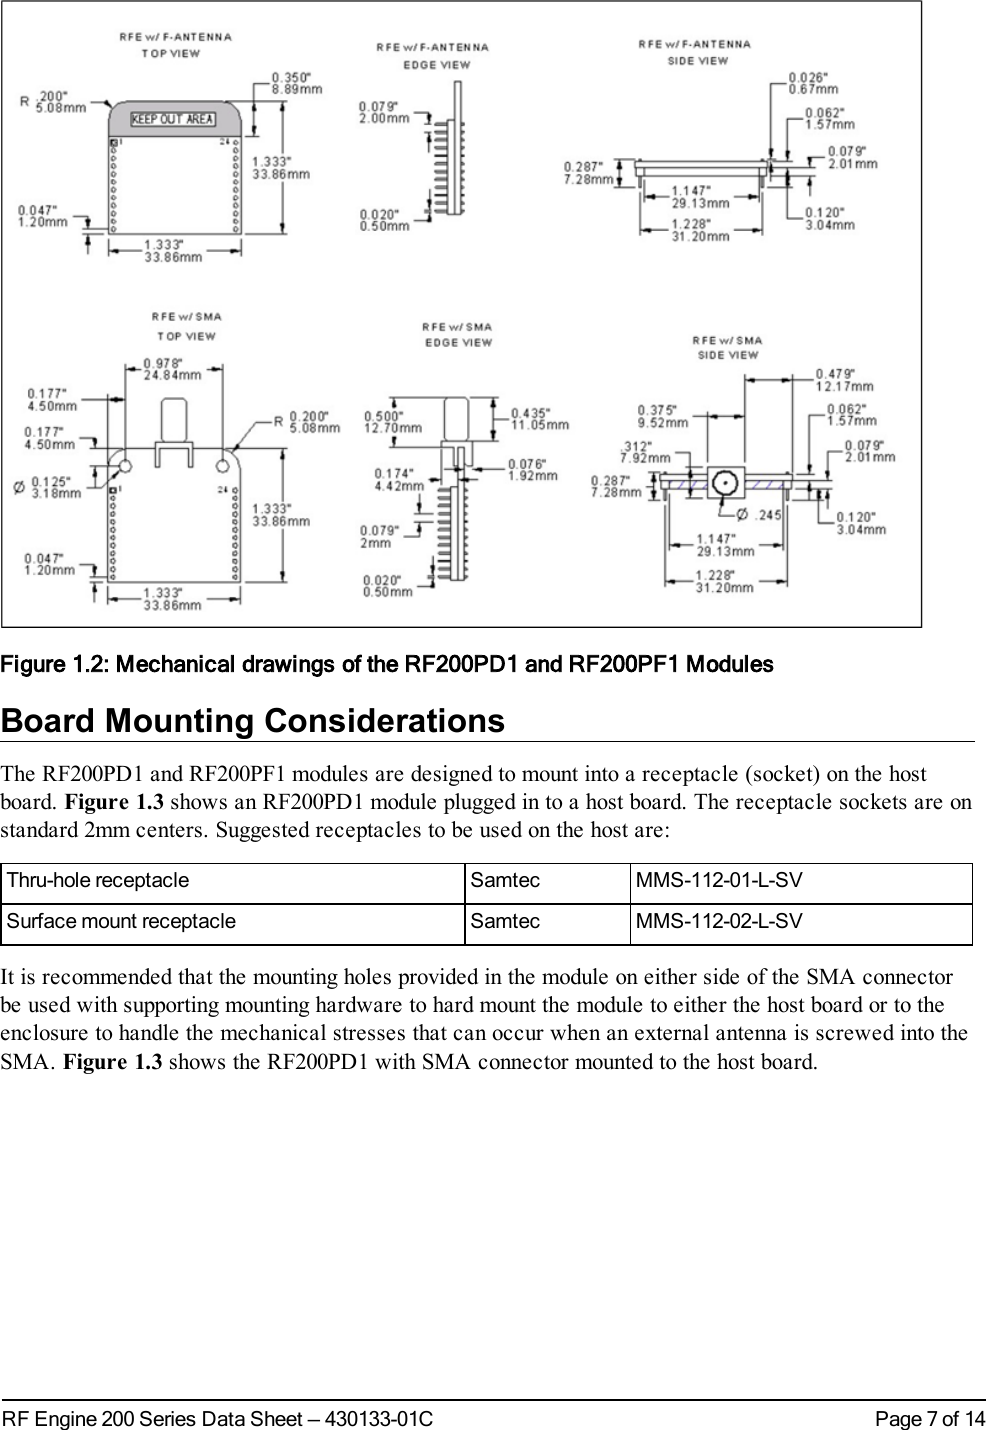 Page 7 of 14RF Engine 200 Series Data Sheet — 430133-01CFigure 1.2: Mechanical drawings of the RF200PD1 and RF200PF1 ModulesBoard Mounting ConsiderationsThe RF200PD1 and RF200PF1 modules are designed to mount into a receptacle (socket) on the hostboard. Figure 1.3 shows an RF200PD1 module plugged in to a host board. The receptacle sockets are onstandard 2mm centers. Suggested receptacles to be used on the host are:Thru-hole receptacle Samtec MMS-112-01-L-SVSurface mount receptacle Samtec MMS-112-02-L-SVIt is recommended that the mounting holes provided in the module on either side of the SMA connectorbe used with supporting mounting hardware to hard mount the module to either the host board or to theenclosure to handle the mechanical stresses that can occur when an external antenna is screwed into theSMA. Figure 1.3 shows the RF200PD1 with SMA connector mounted to the host board.